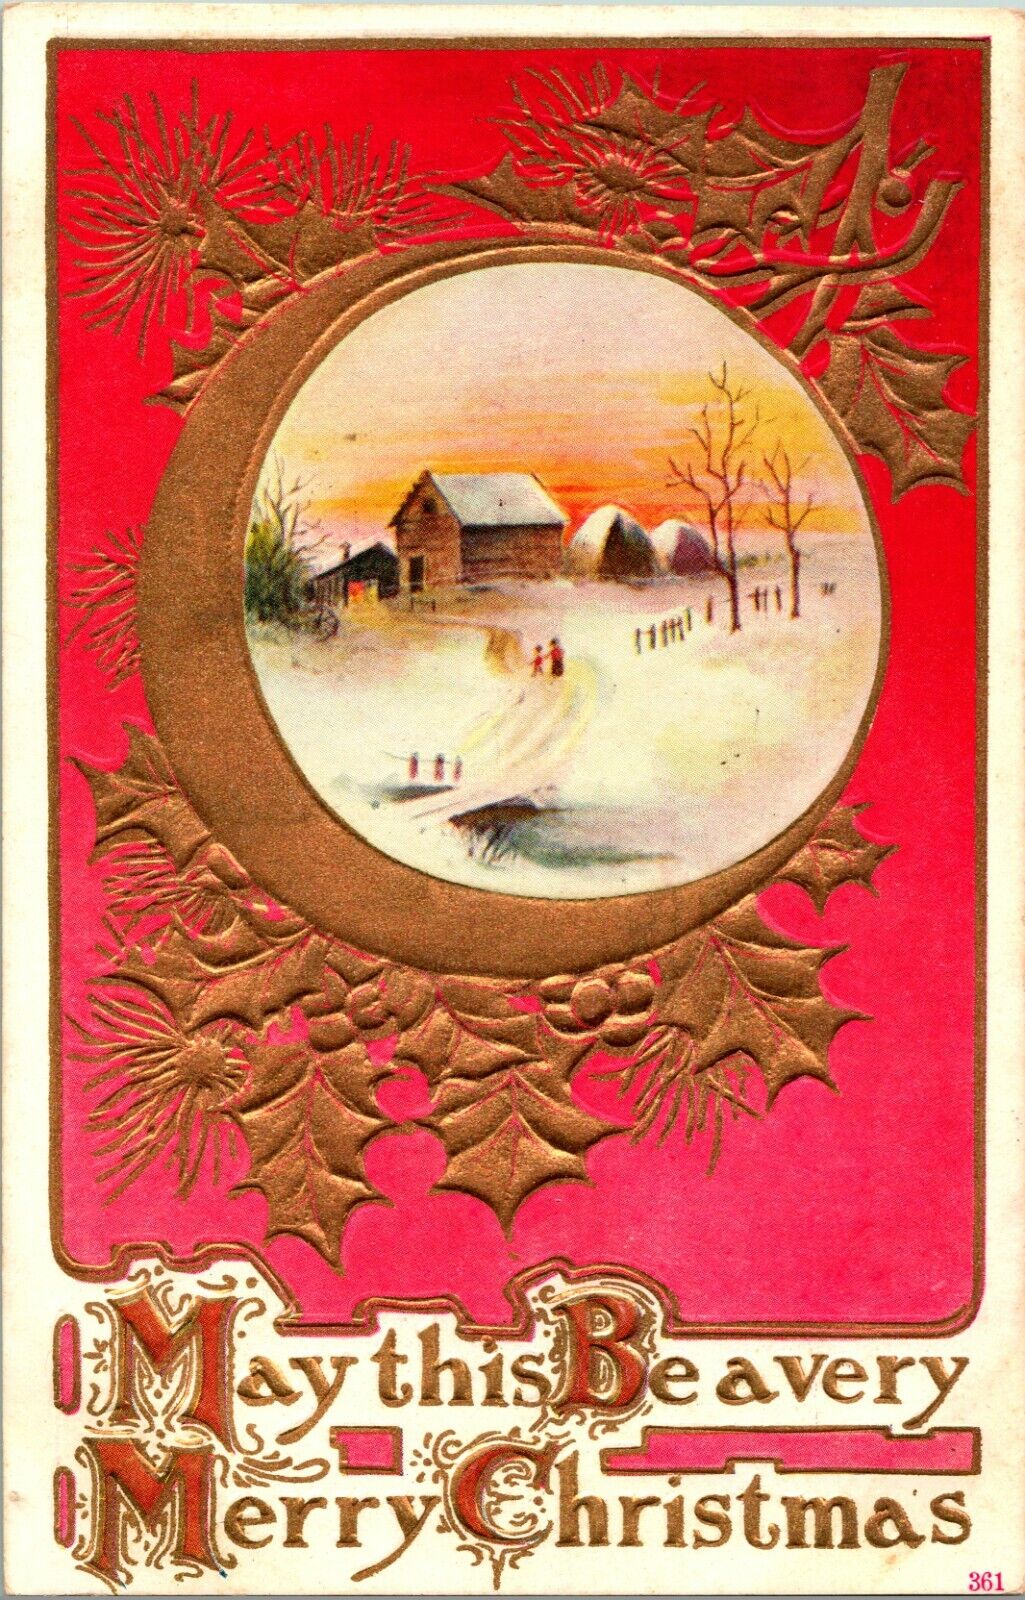 Vtg Postcard 1910s - May This Be a Very Merry Christmas Embossed Gilded Unused